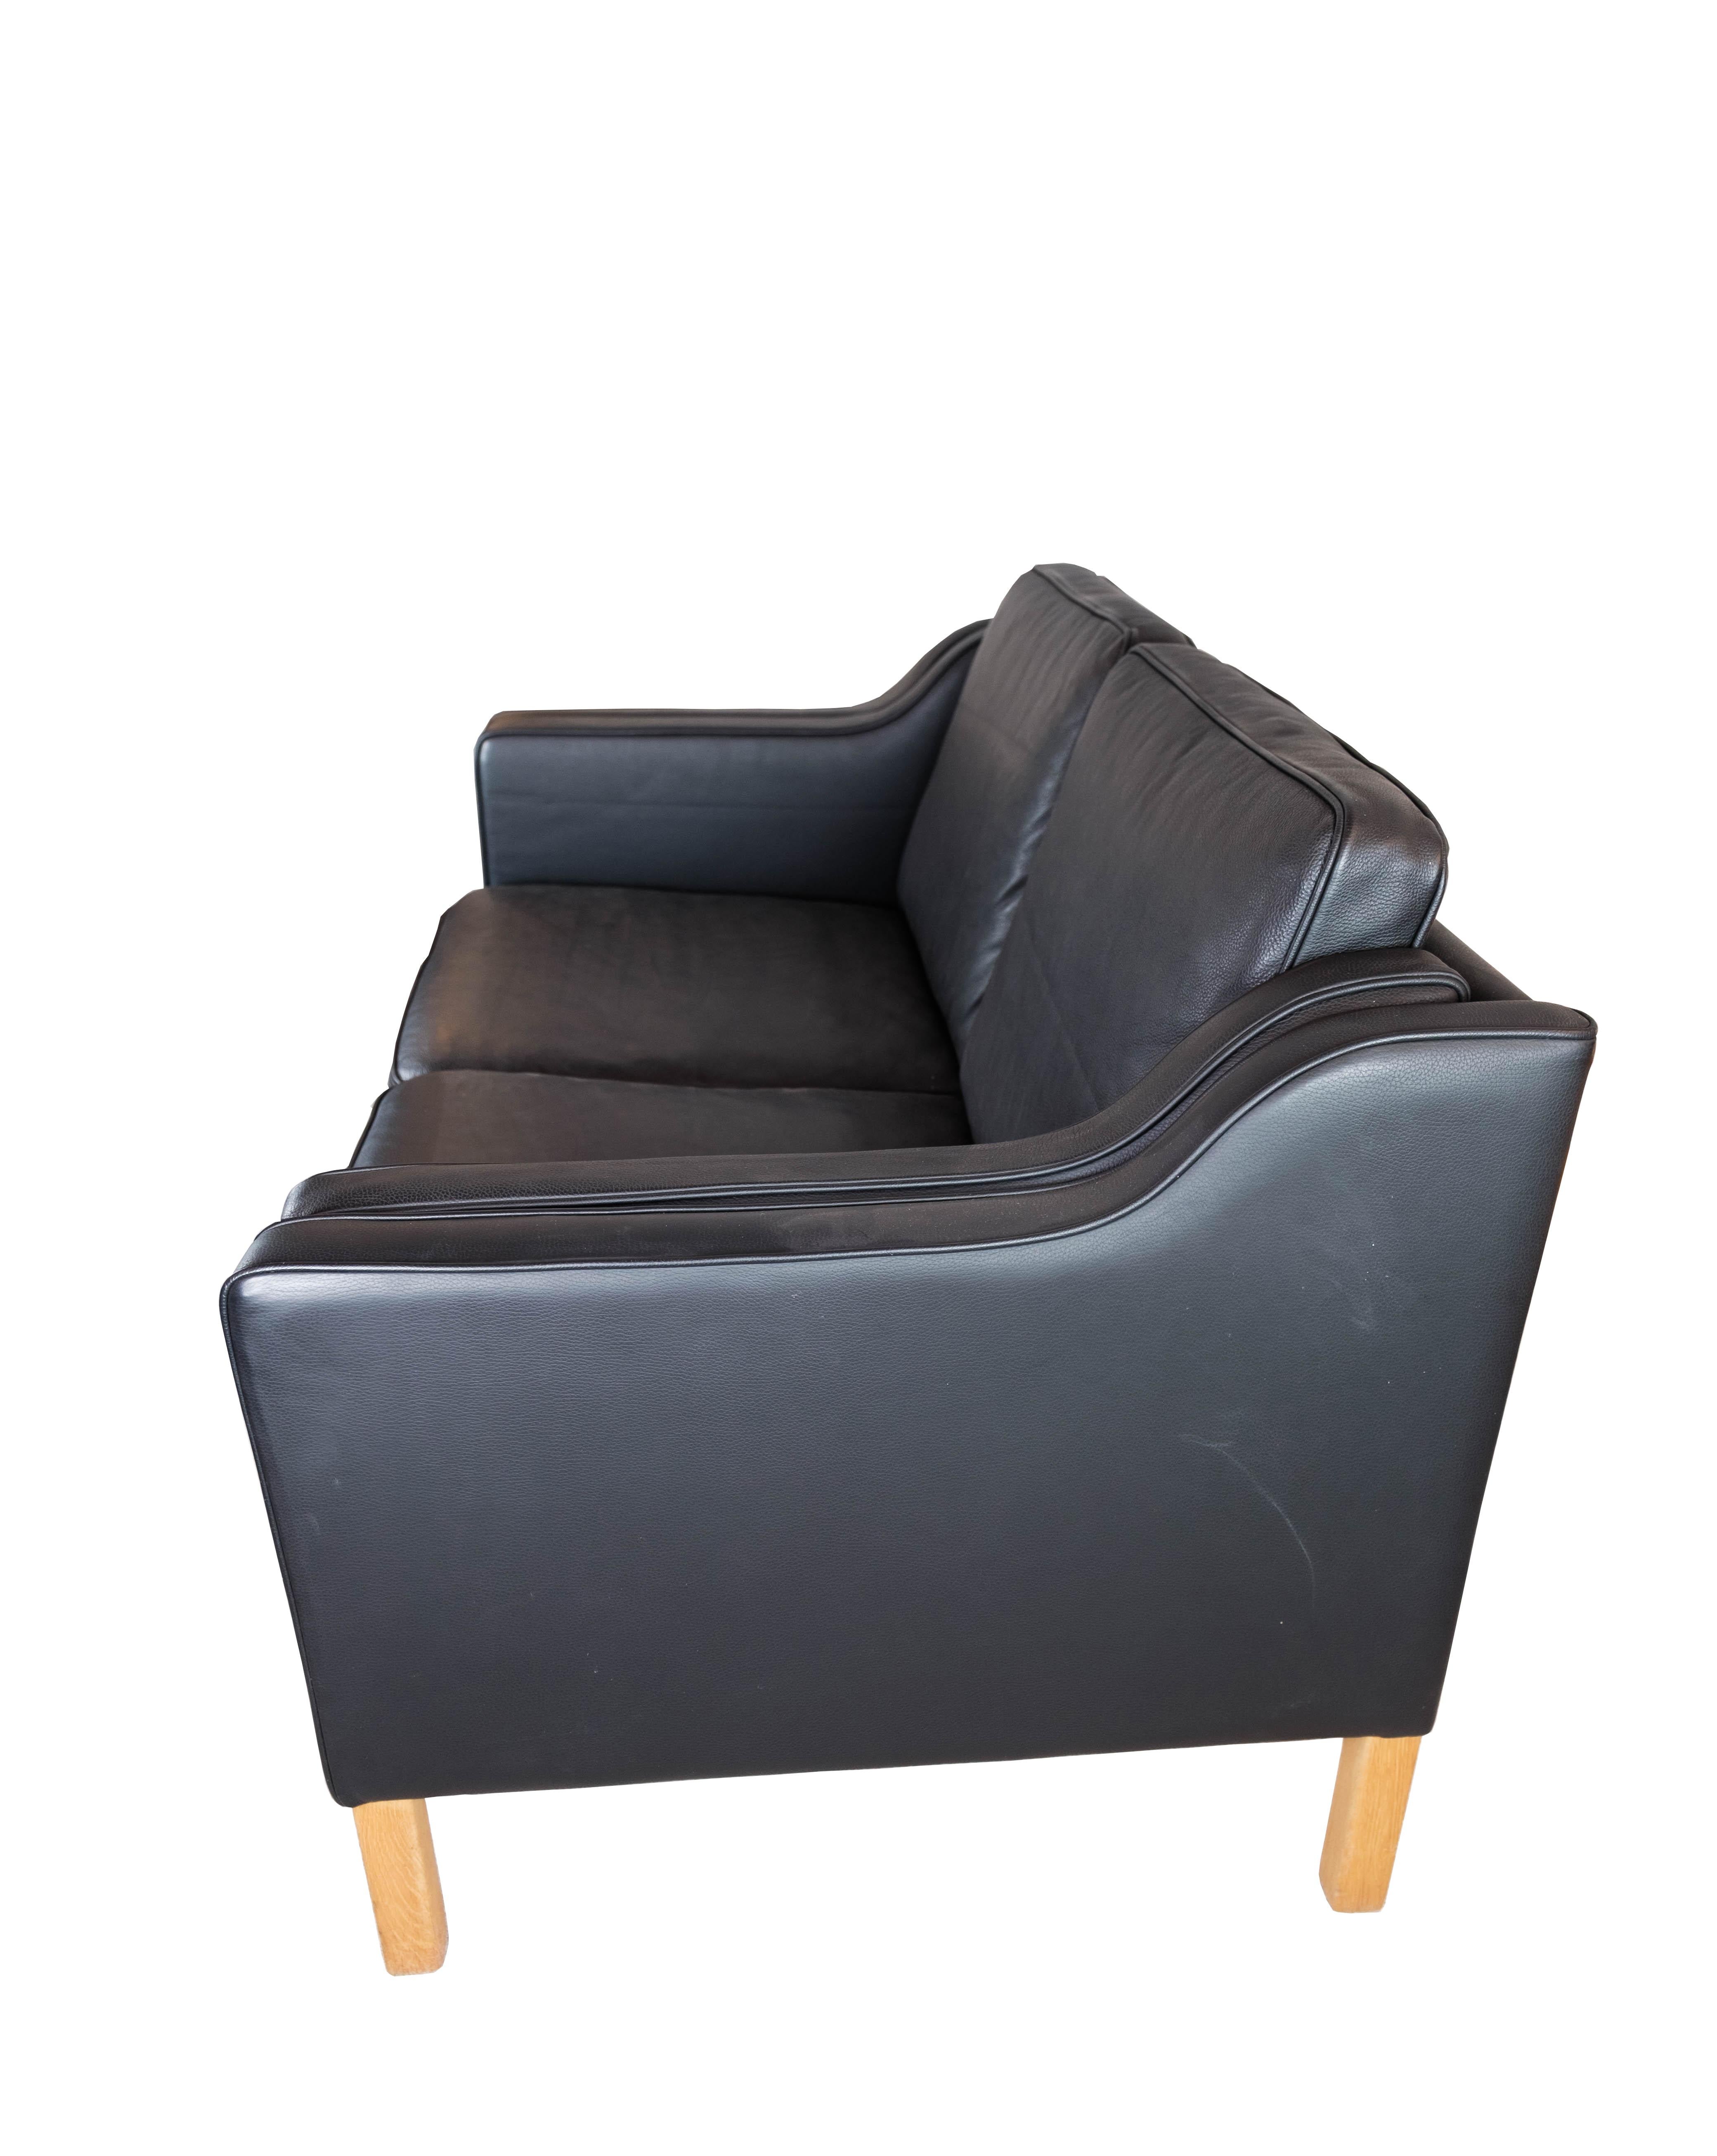 Black Leather 2 Seater Sofa with Legs of Oak, Manufactured by Stouby Furniture 1